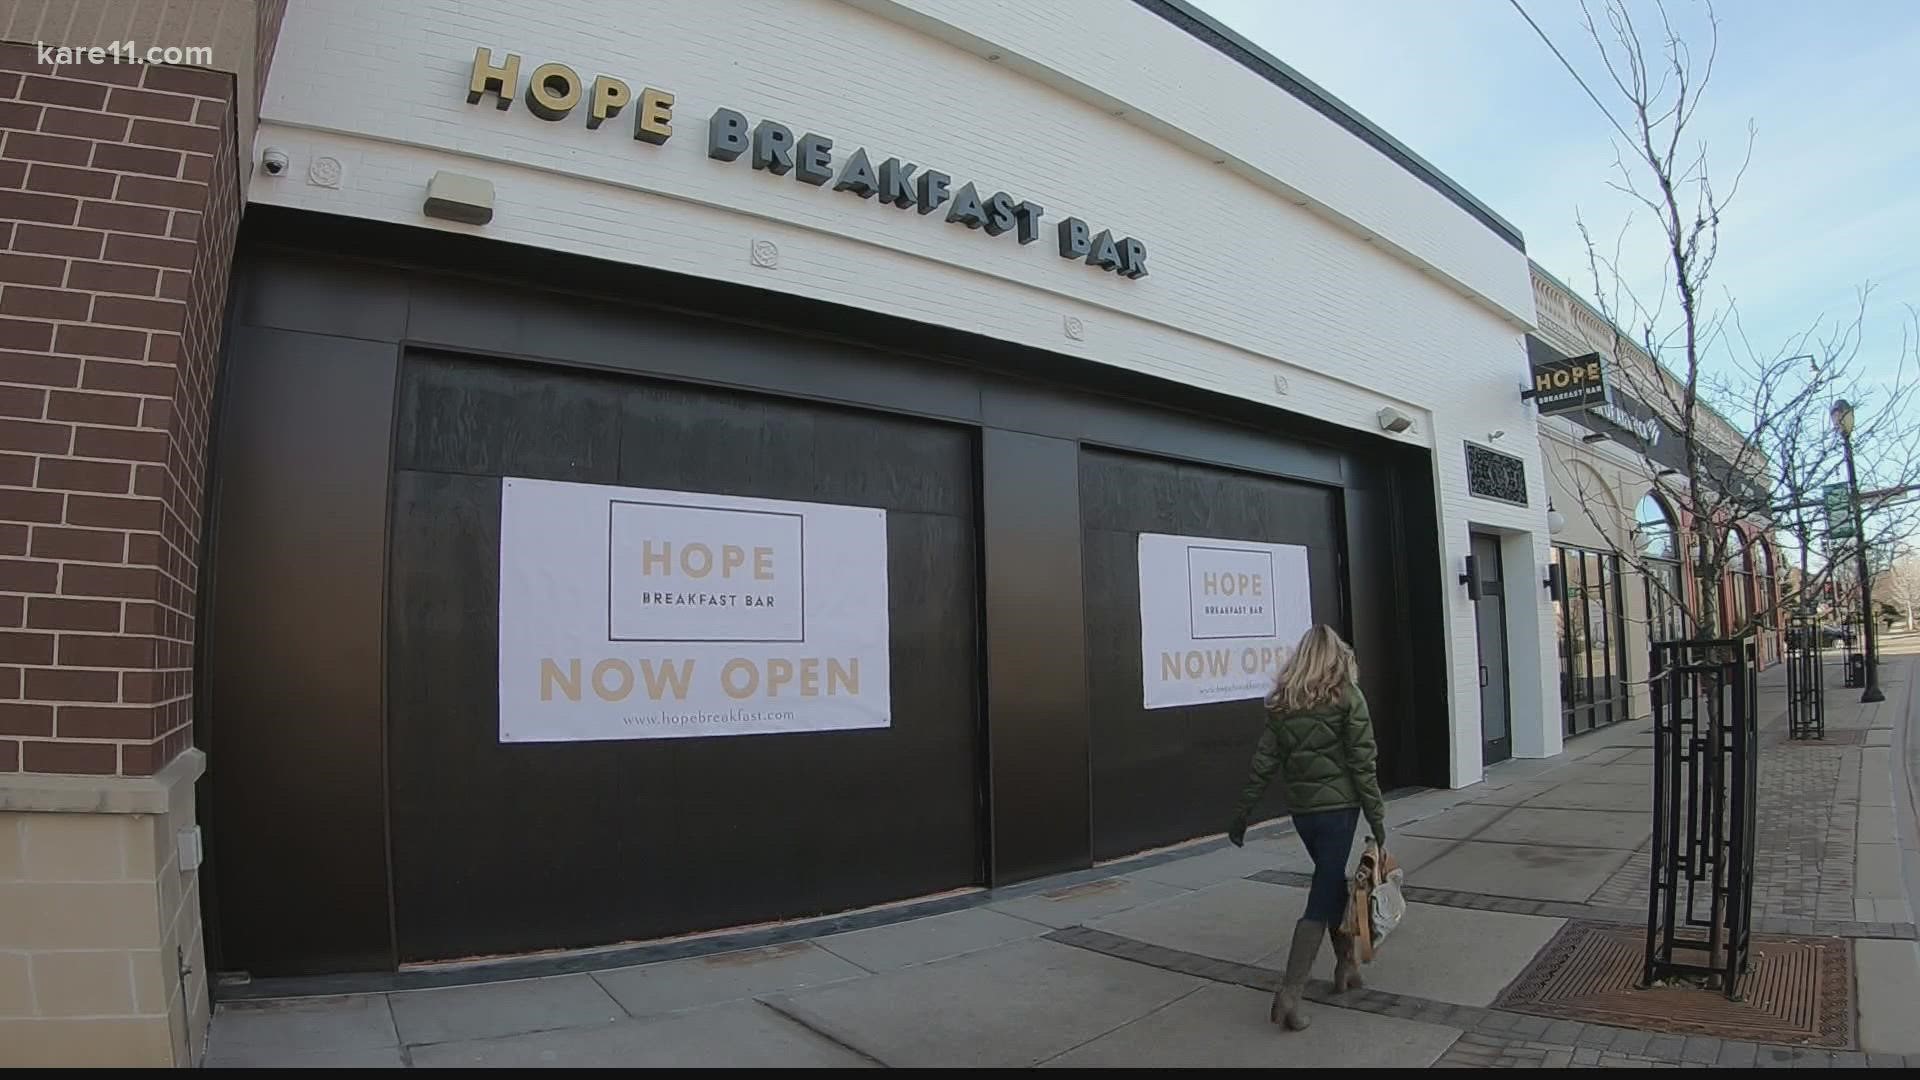 Hope Breakfast Bar is a mission-based business with a percentage of its sales going back to the community through Give Hope.